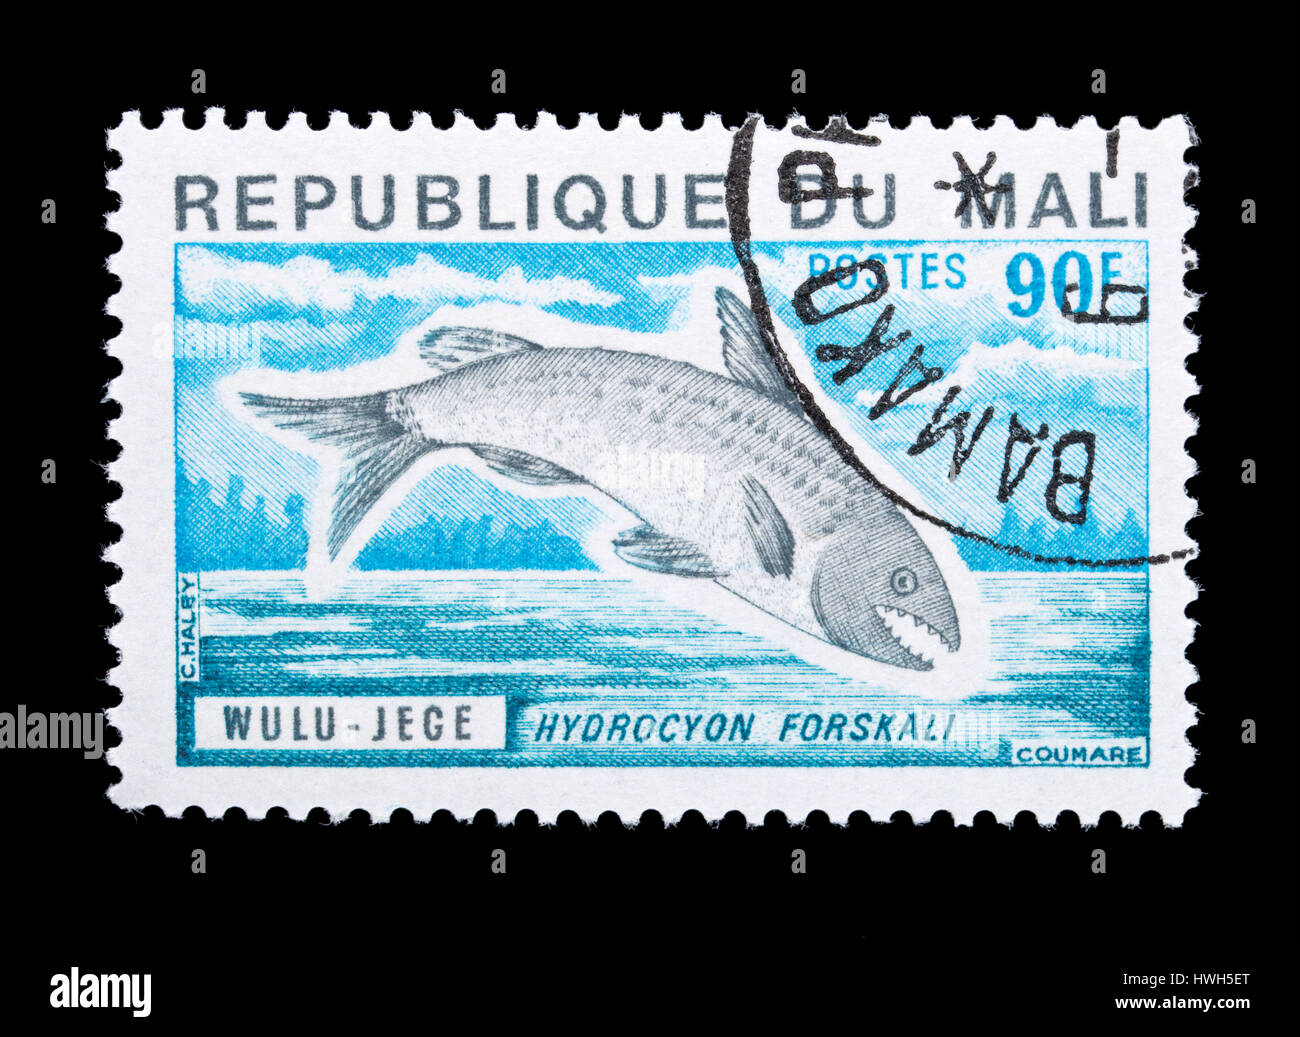 Postage stamp from Mali depicting a Elongate Tigerfish (Hydrocyon forskali) Stock Photo